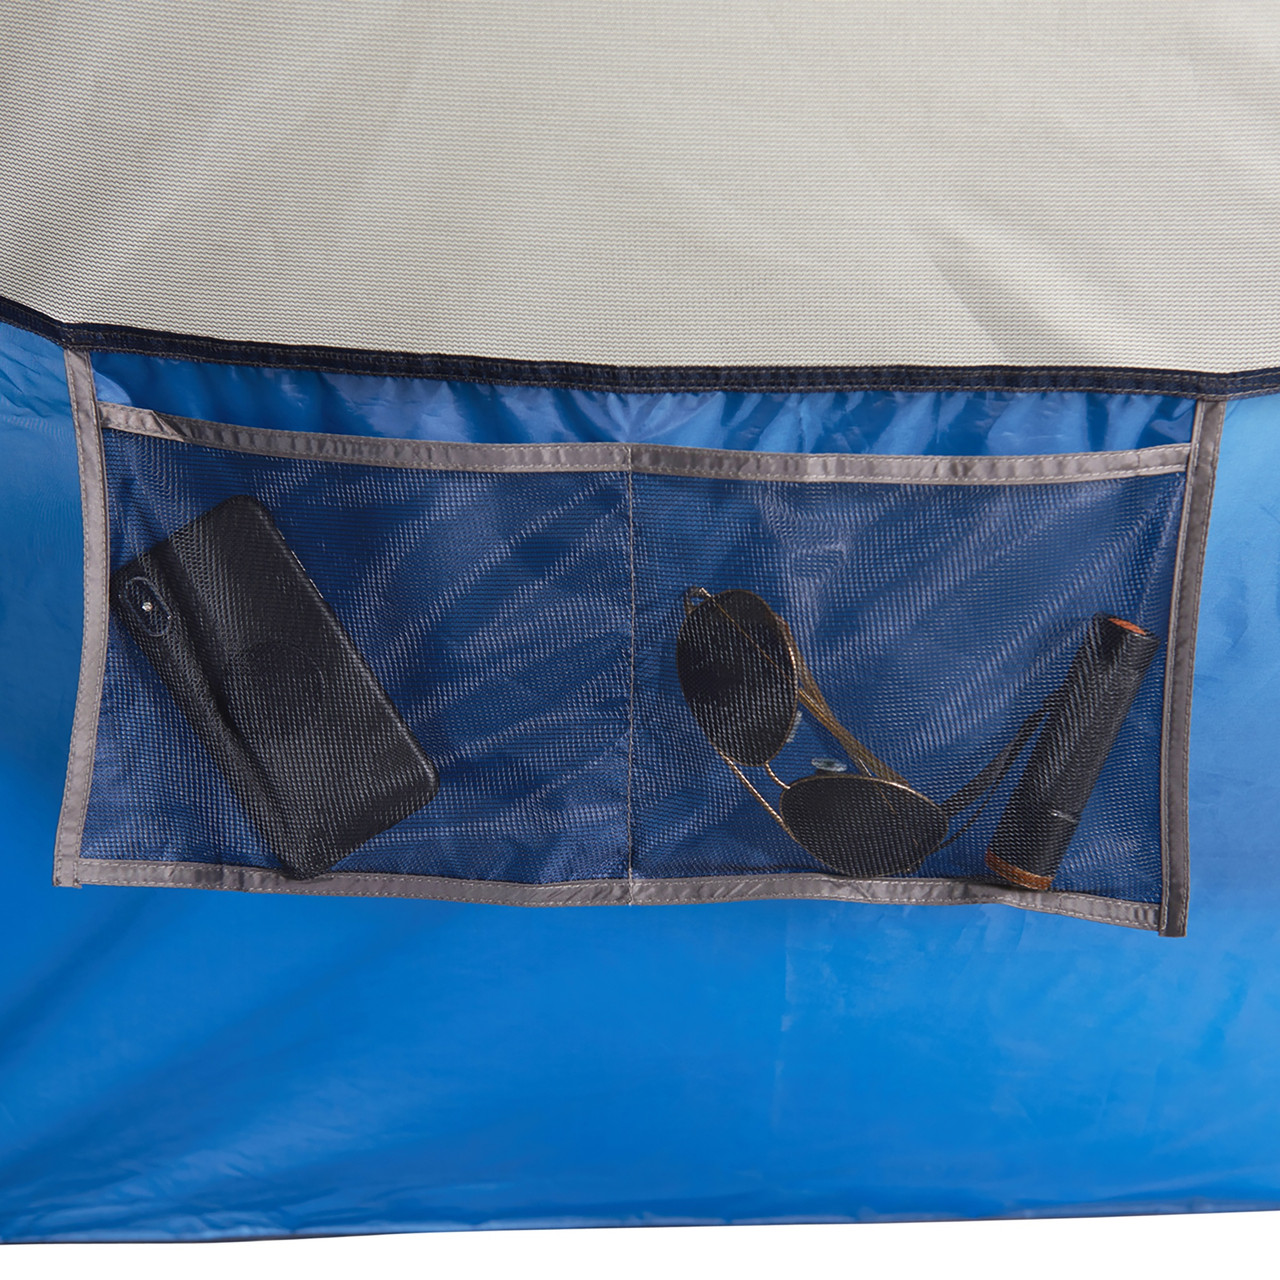 Interior close up of Wenzel Tamarack 6 Person Dome Tent, showing large hanging mesh pocket